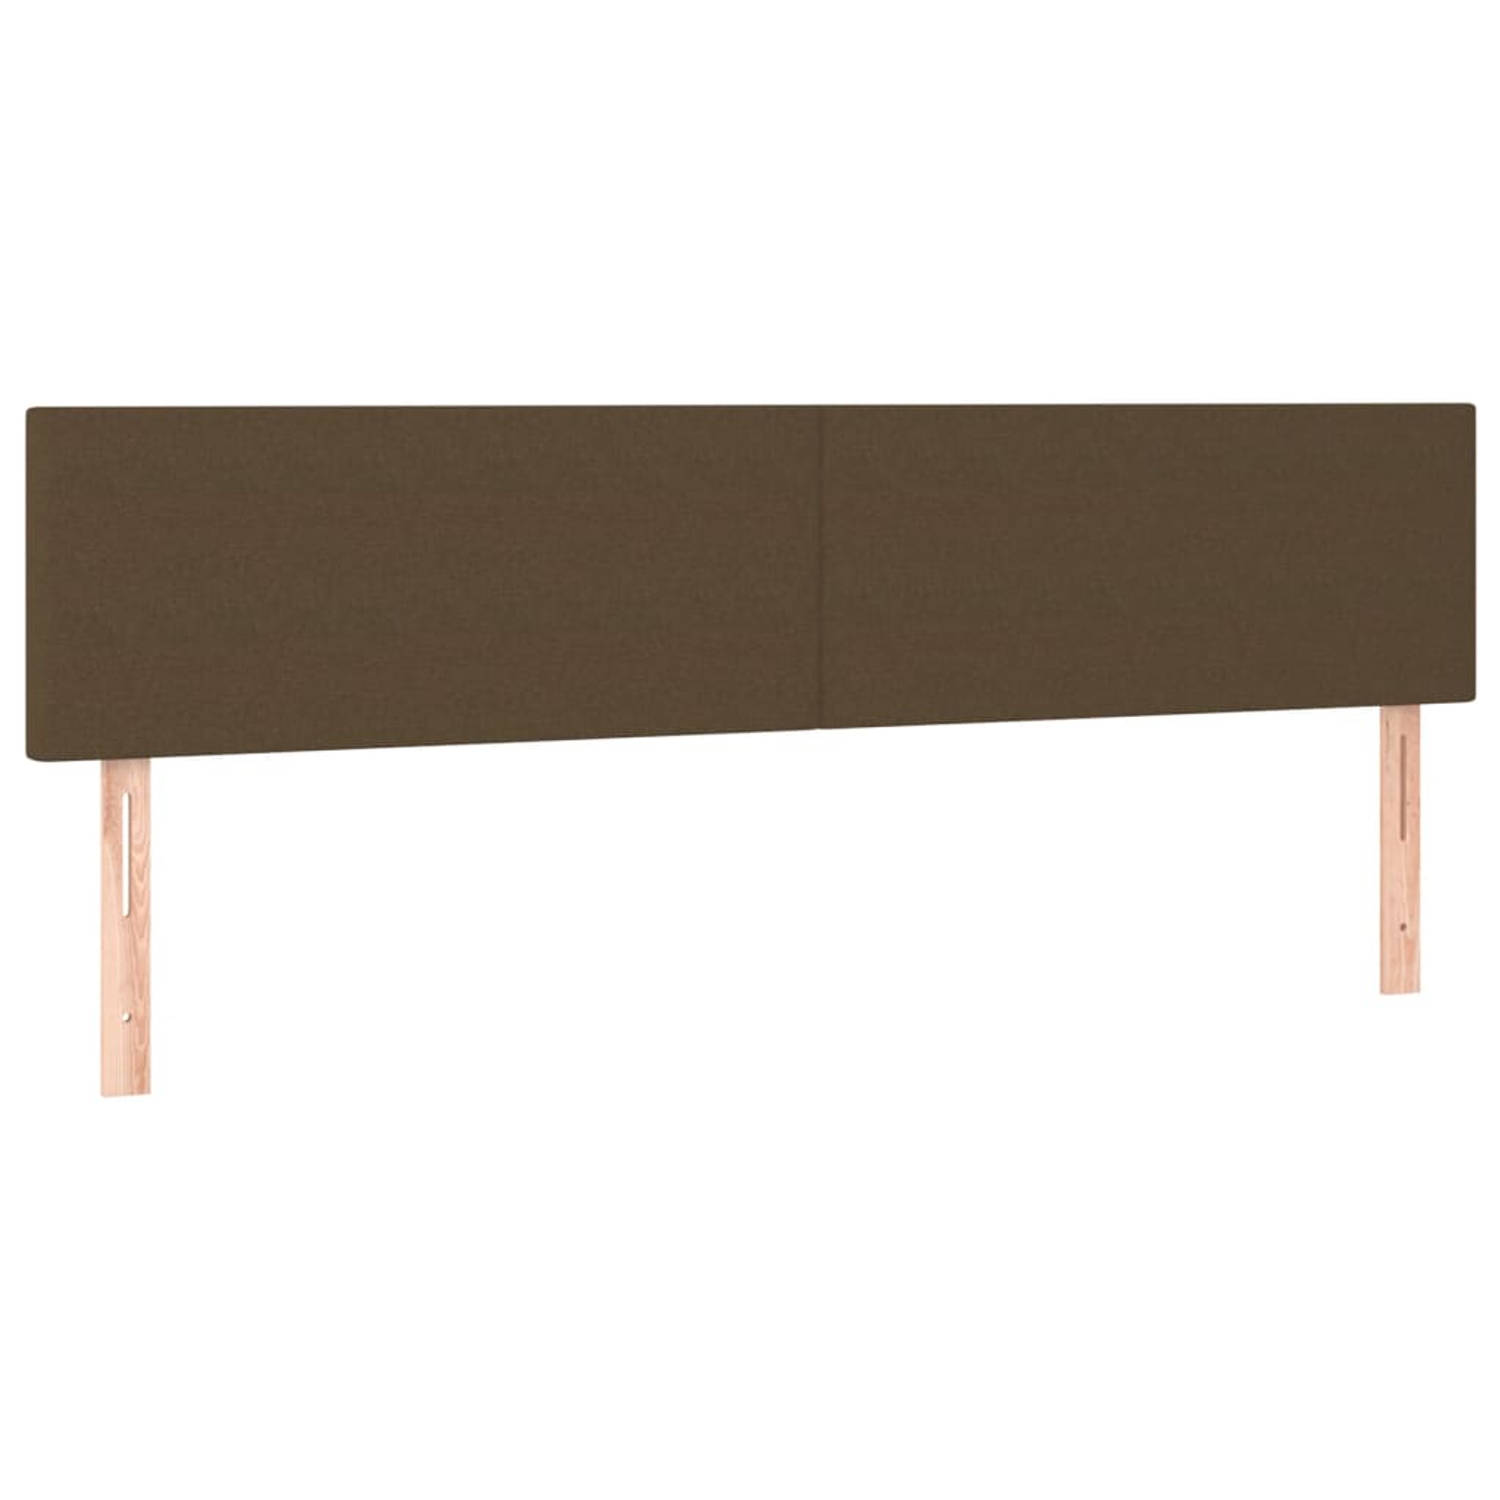 The Living Store Hoofdbord Bed - 200 x 5 x 78/88 cm - Donkerbruin